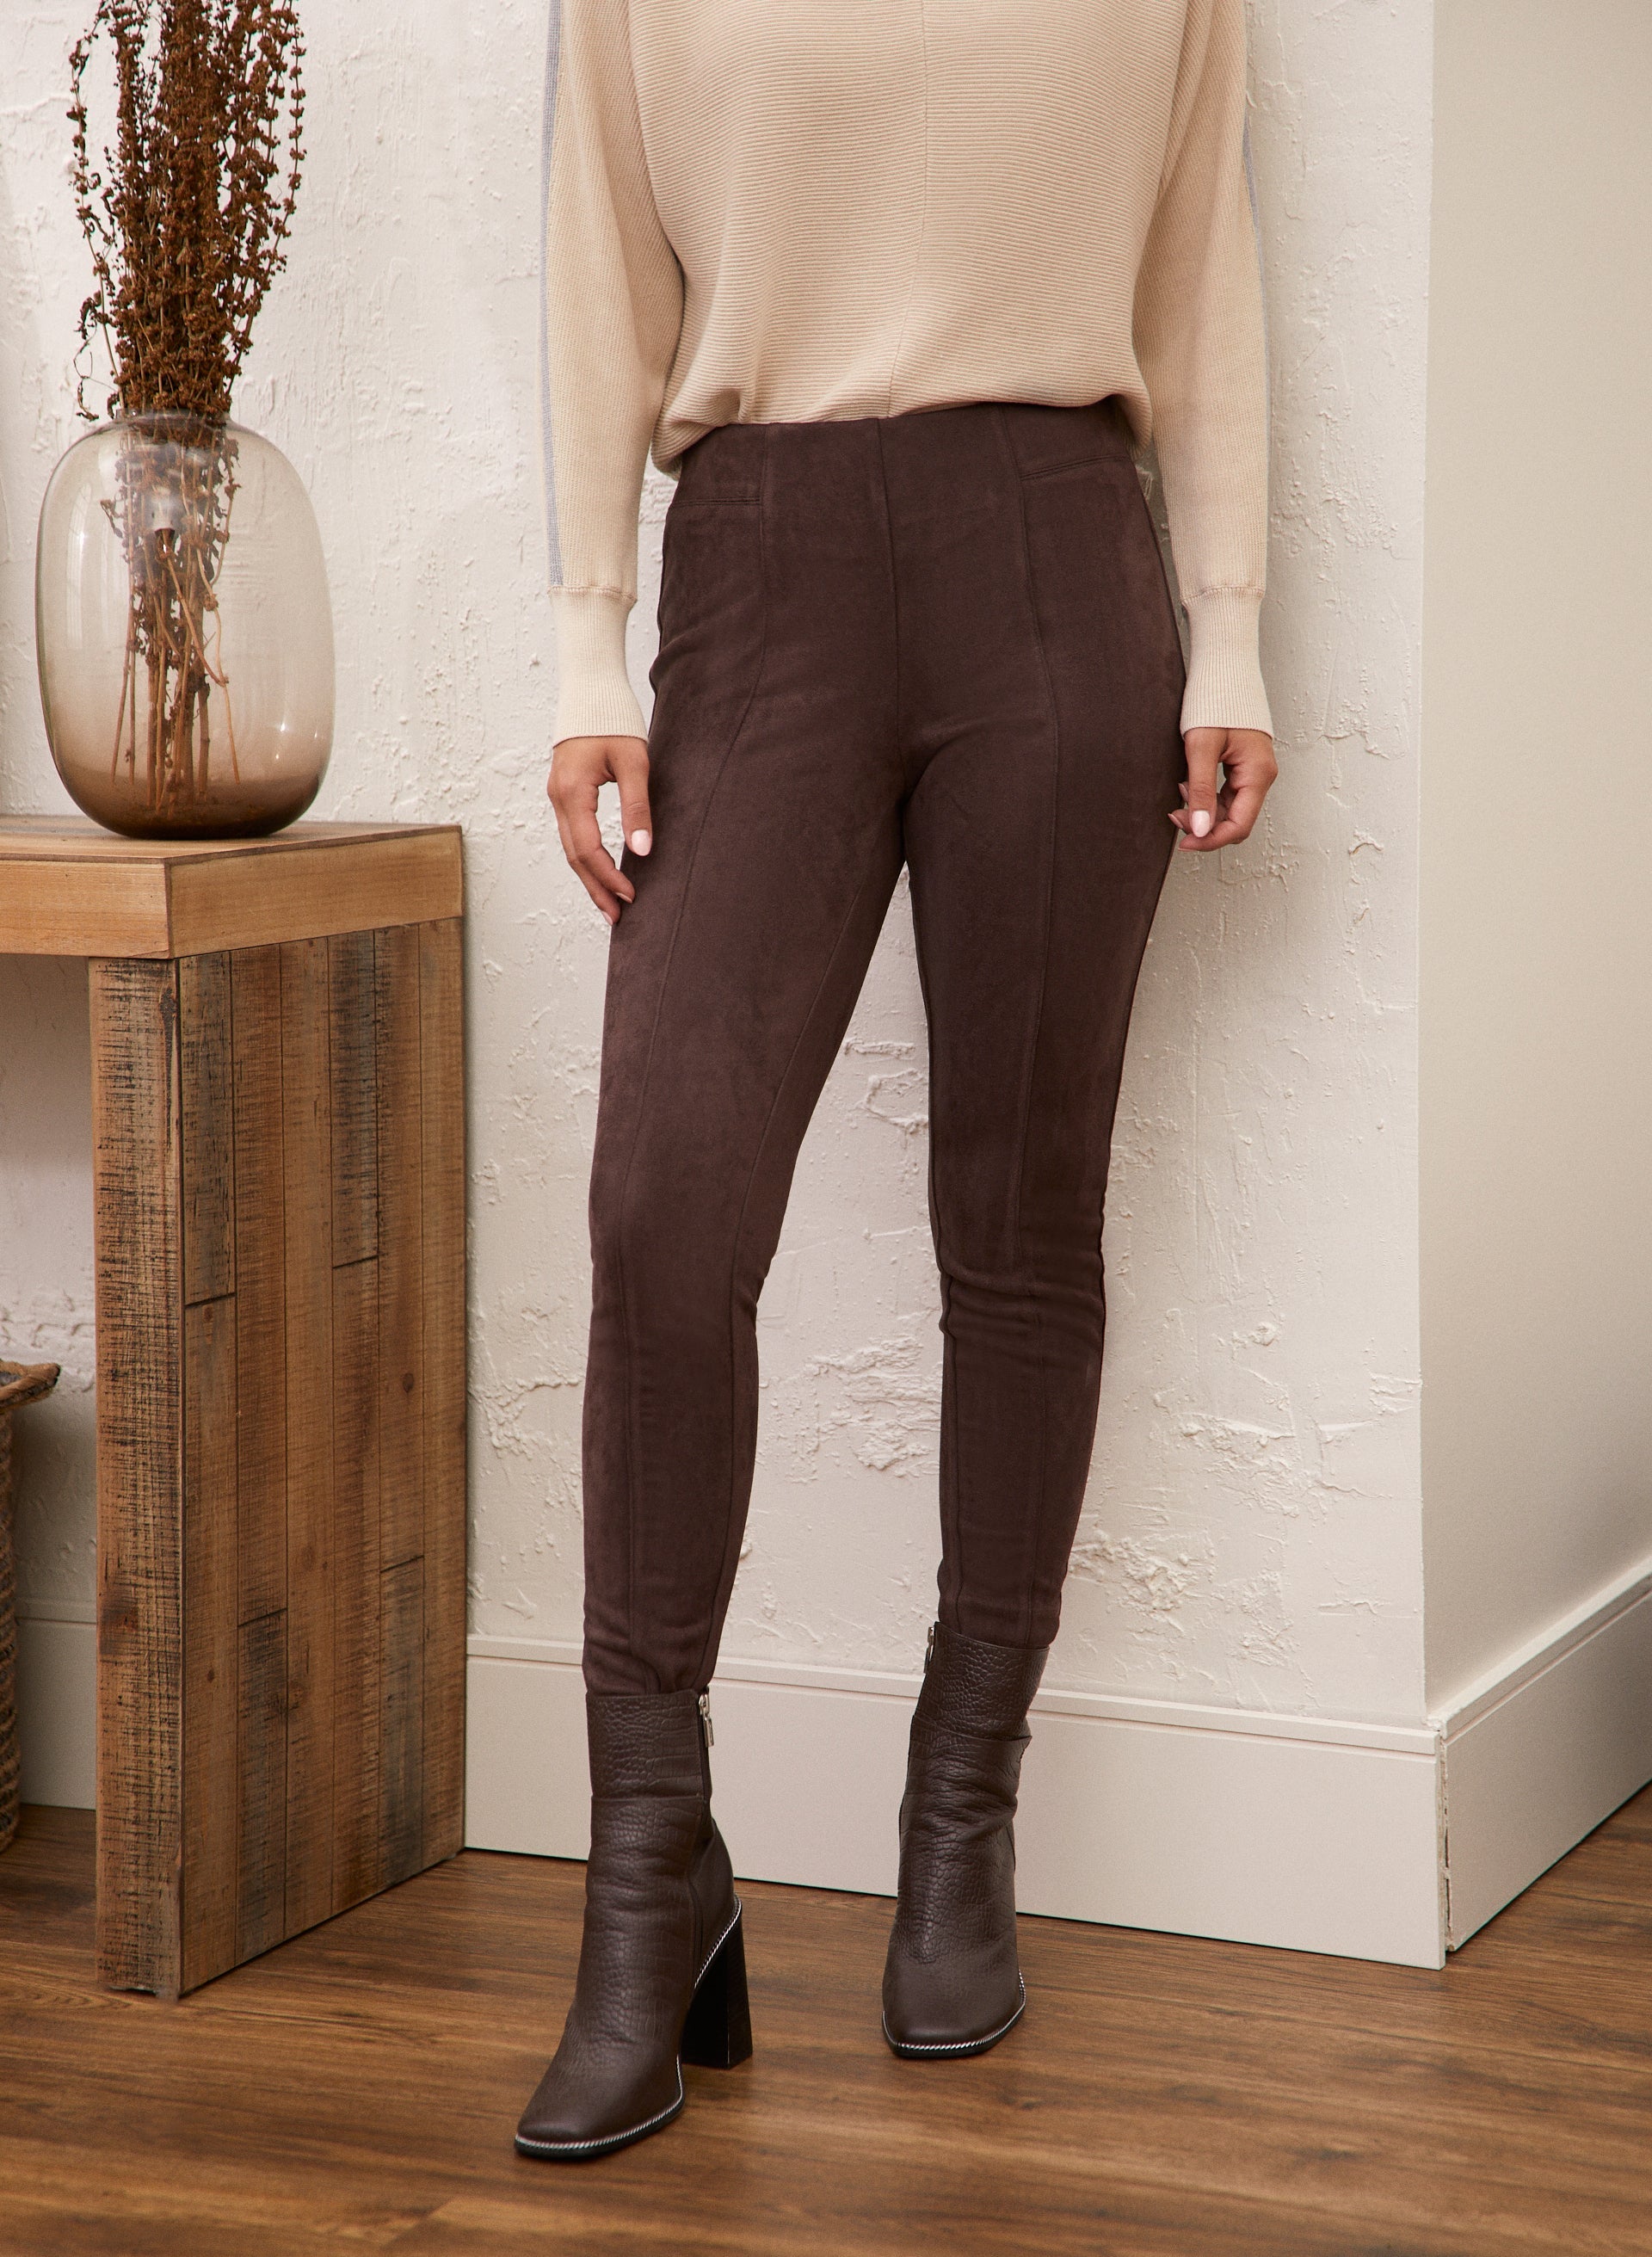 Style Co Faux Suede Pull On Comfort Weist Leggings Women Brown XS